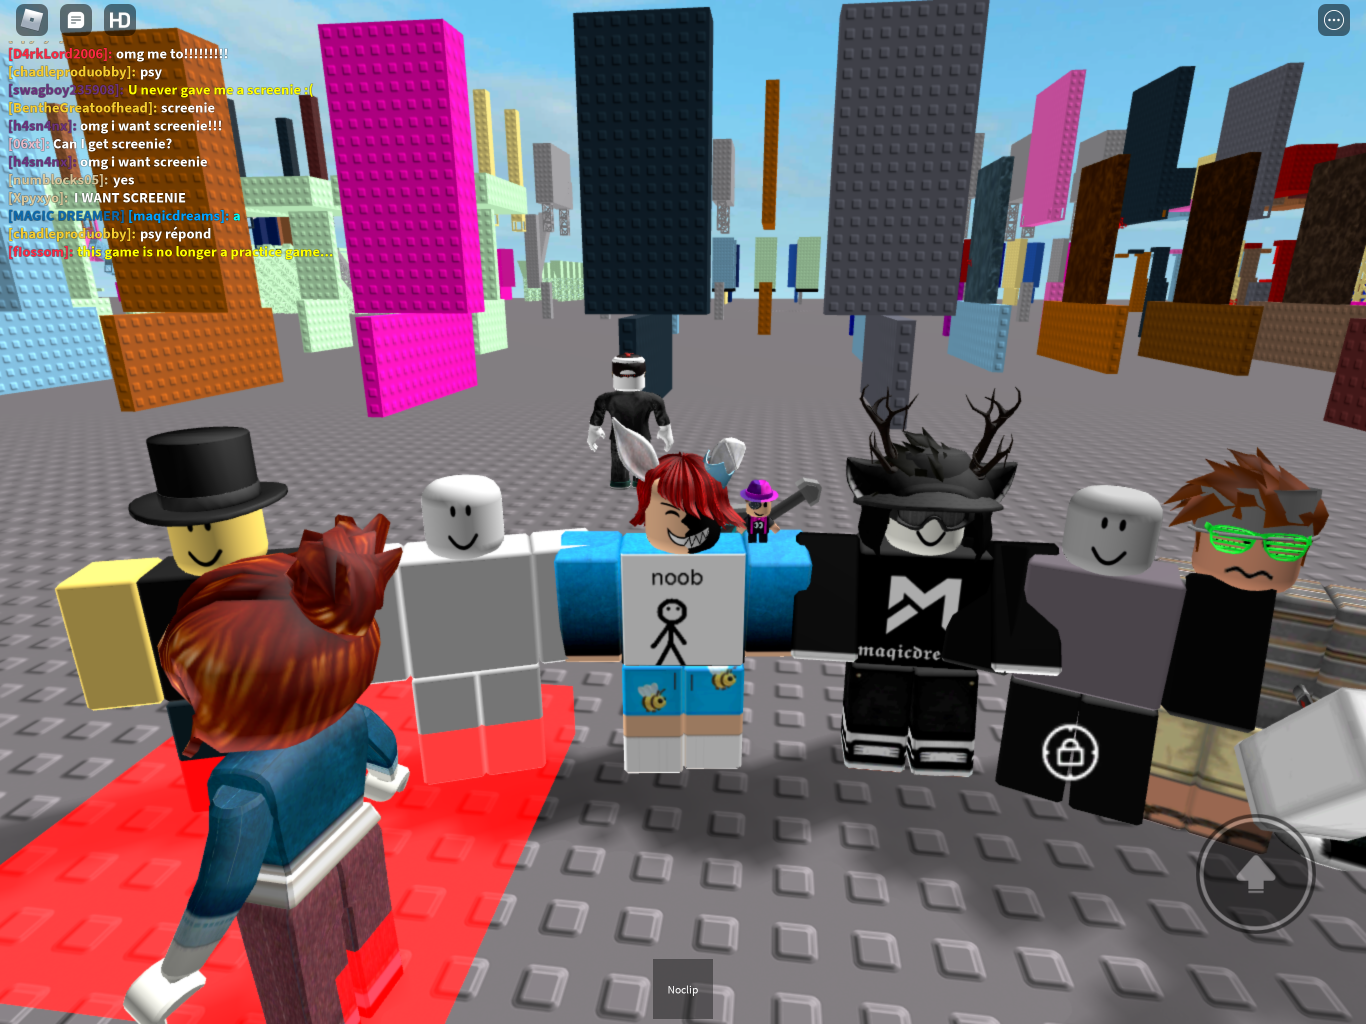 Crowded roblox game has YouTuber in it Blank Template - Imgflip